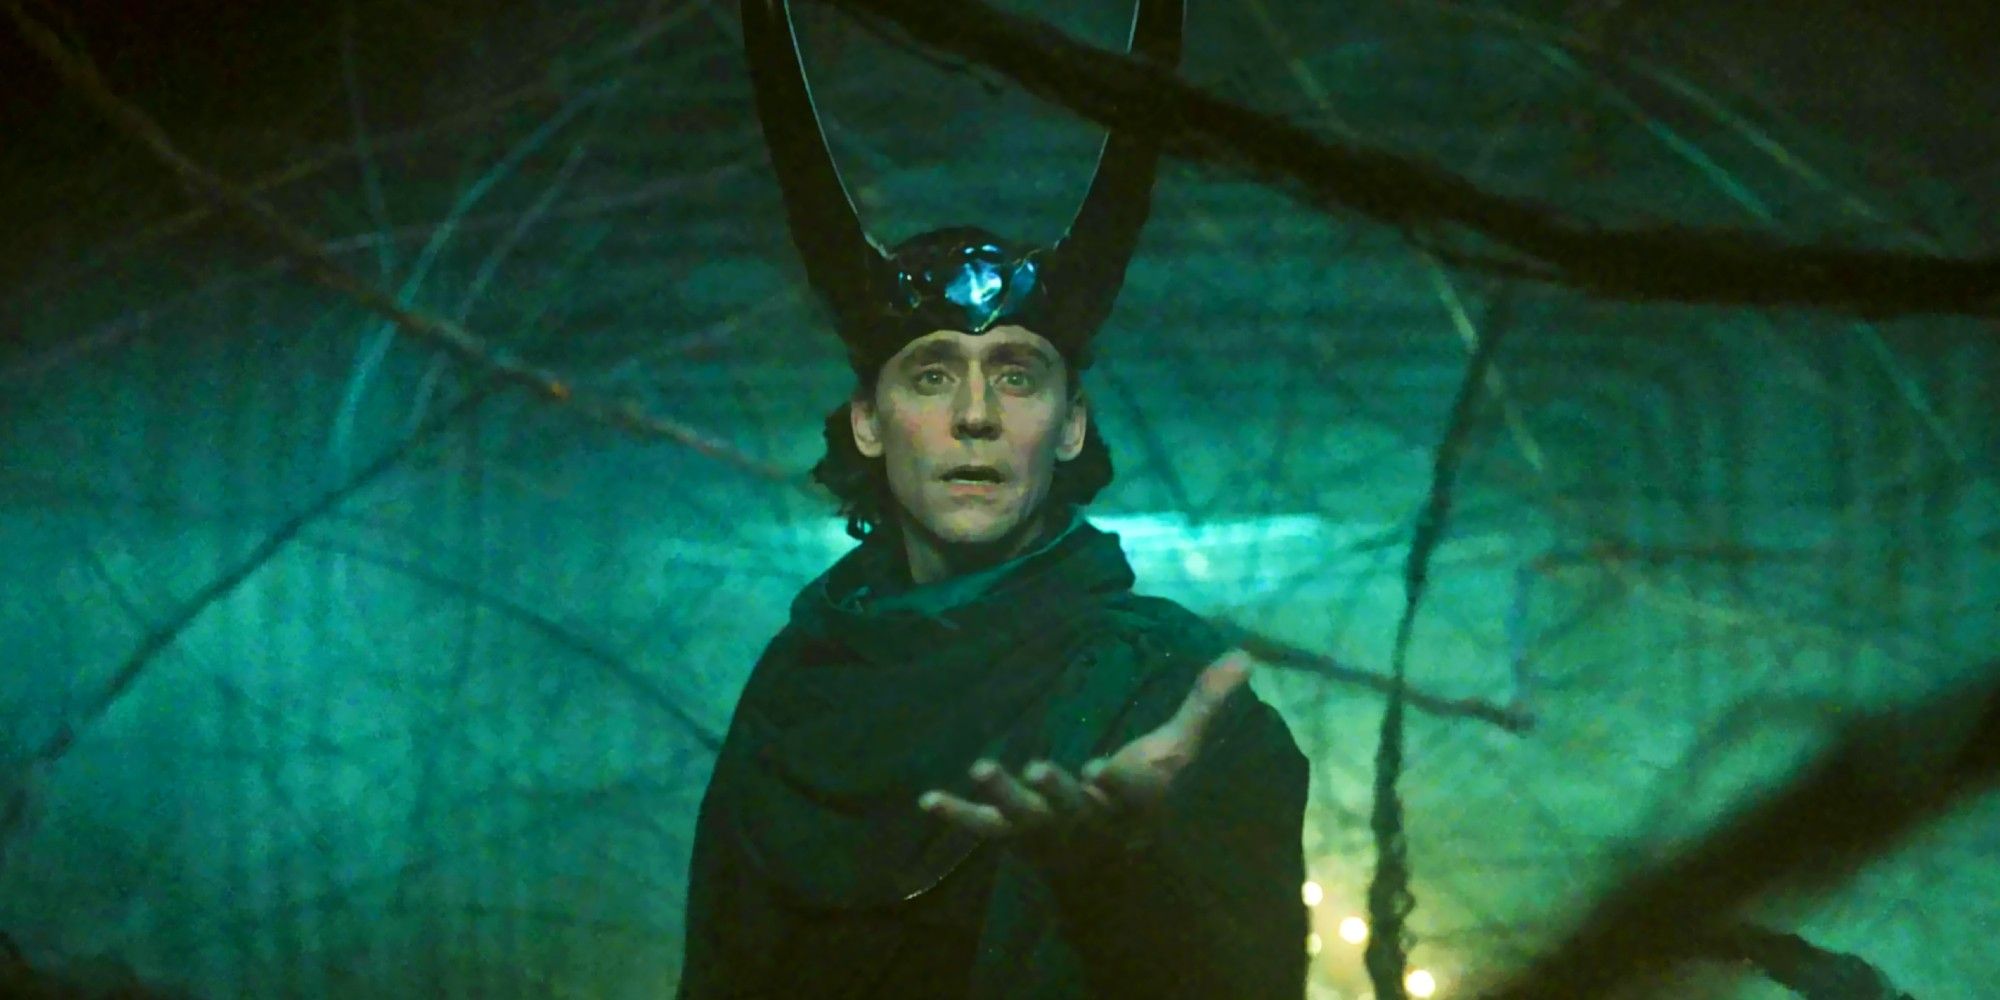 Tom Hiddleston As God Loki Reaching Out Amongst The Strands Of The Multiverse In The Loki Season 2 Finale